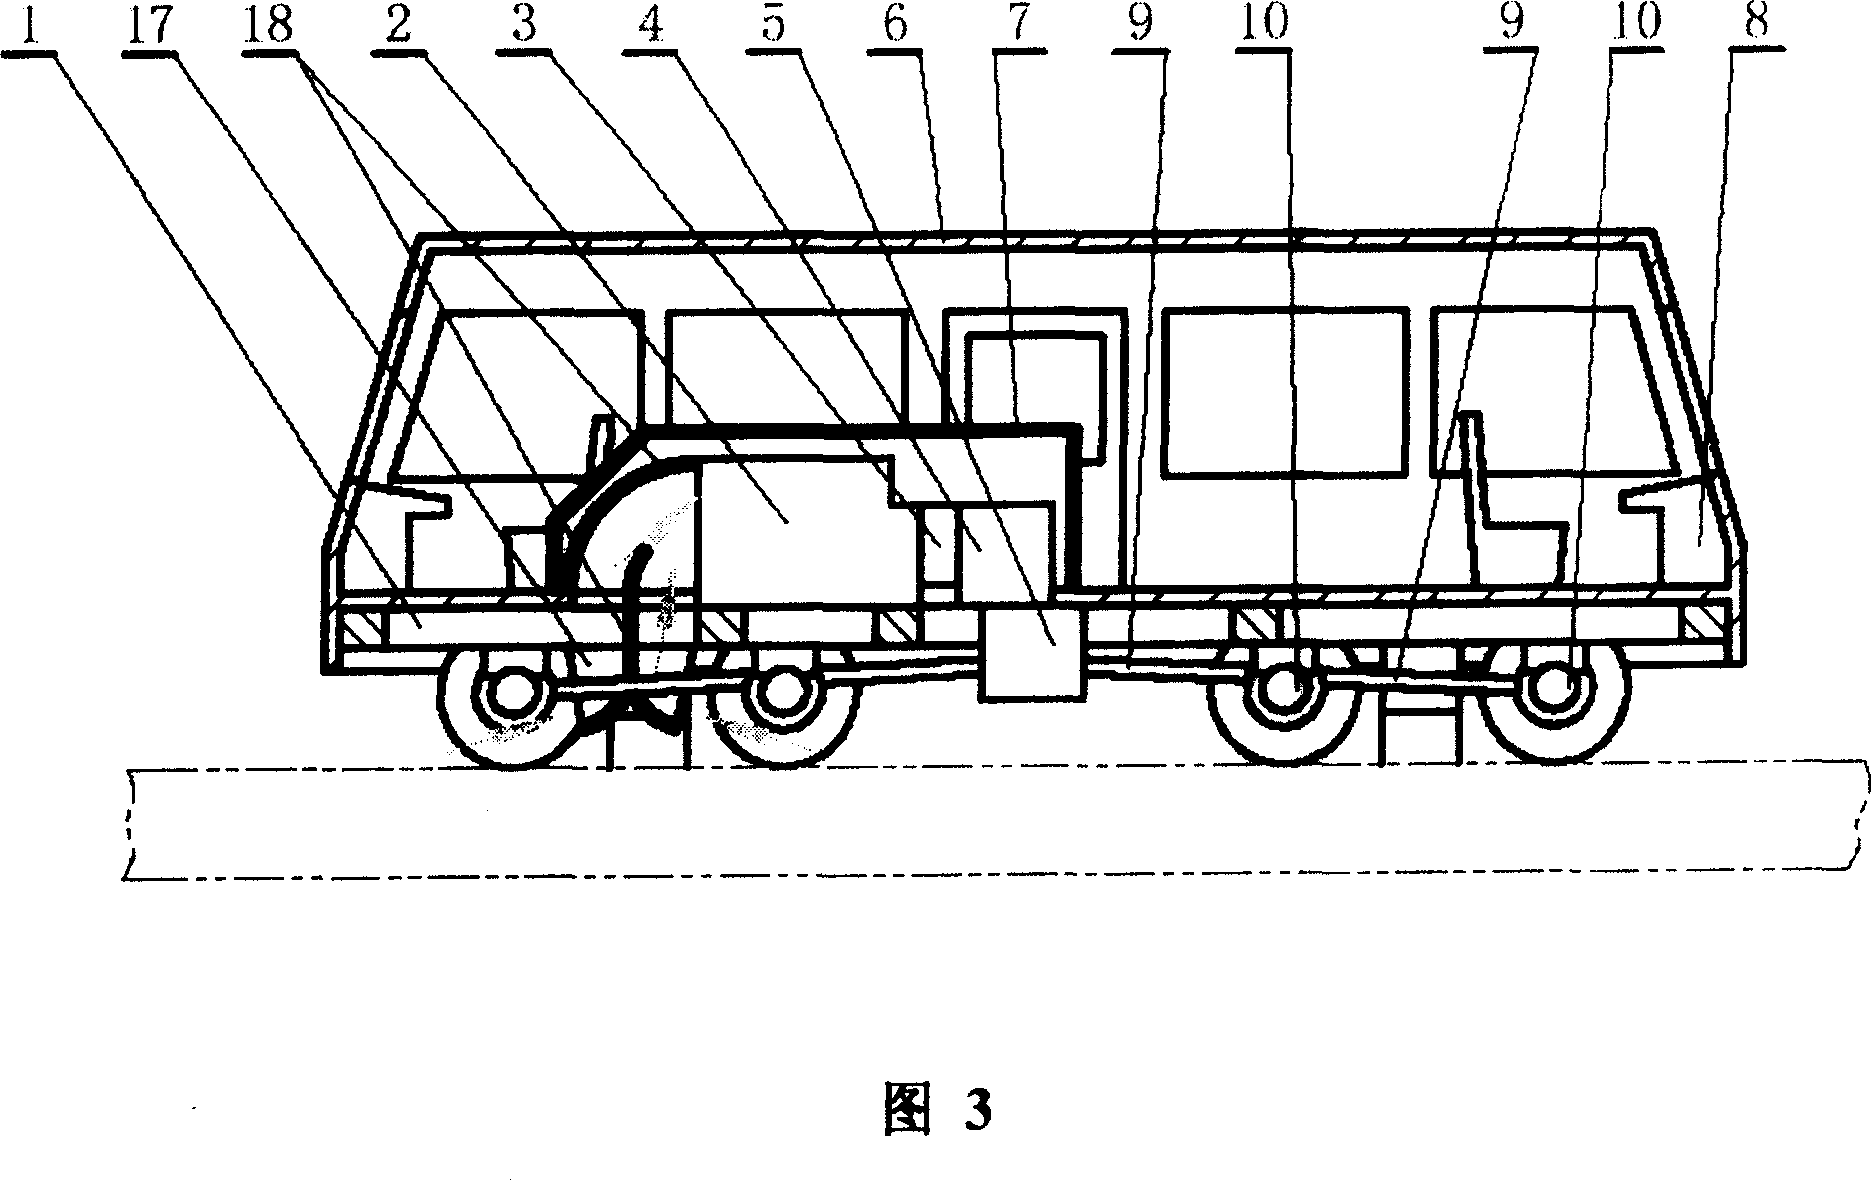 Magnetic suspension track inspection railcar